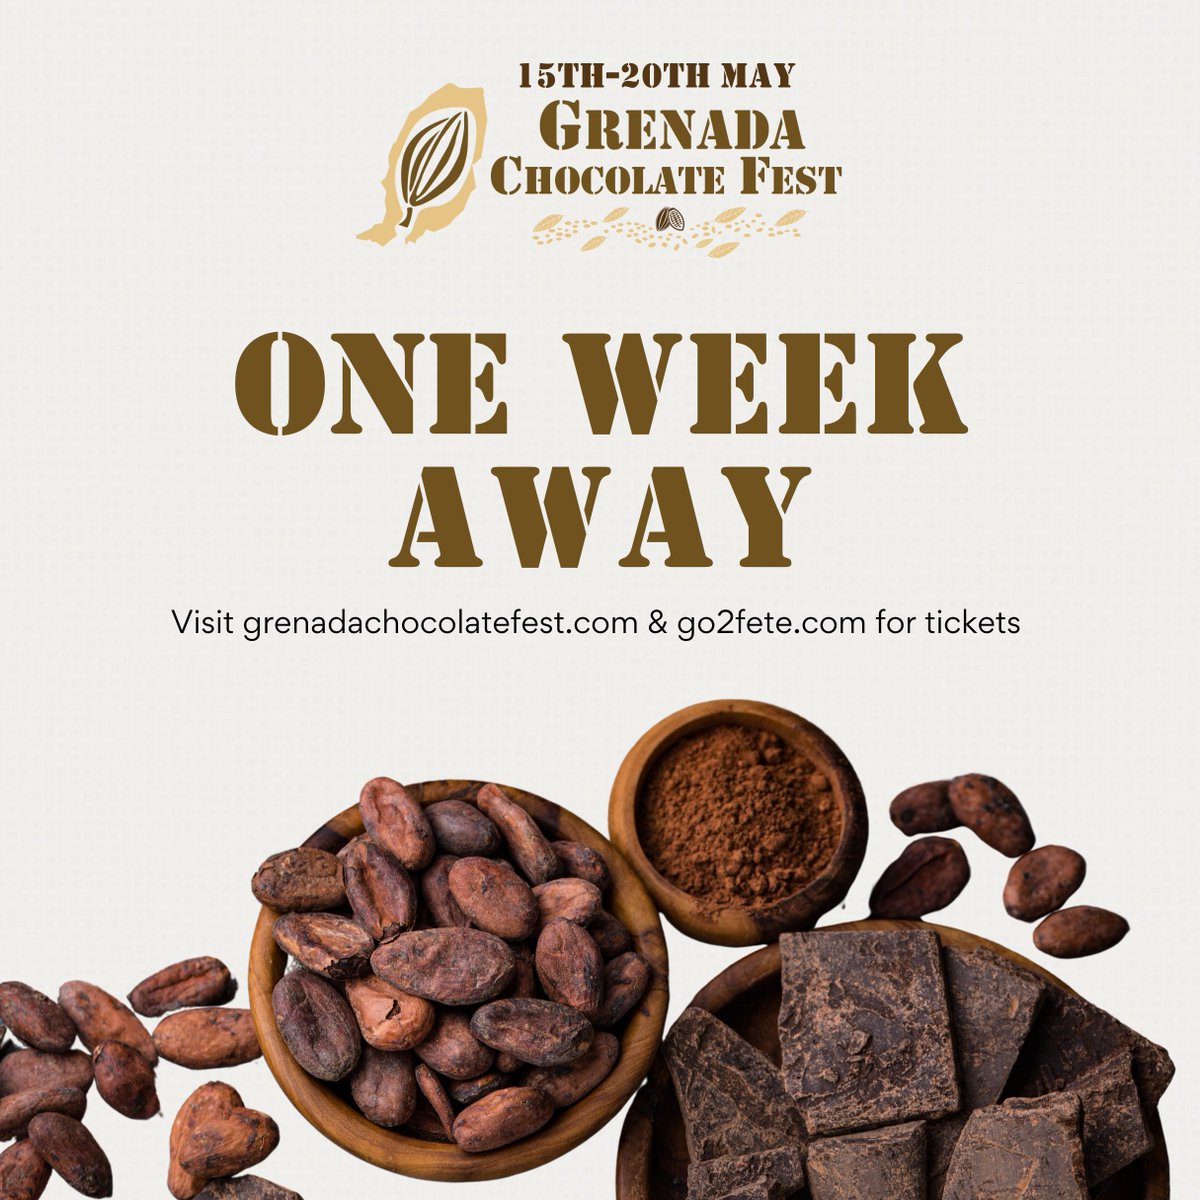 The countdown begins! Just one week until the Grenada Chocolate Festival kicks off. 🍫 Make sure you don't miss out on the chocolatey goodness – get your tickets now on grenadachocolatefest.com and go2fete.com!

#GrenadaChocolateFest #Grenada #PureGrenada